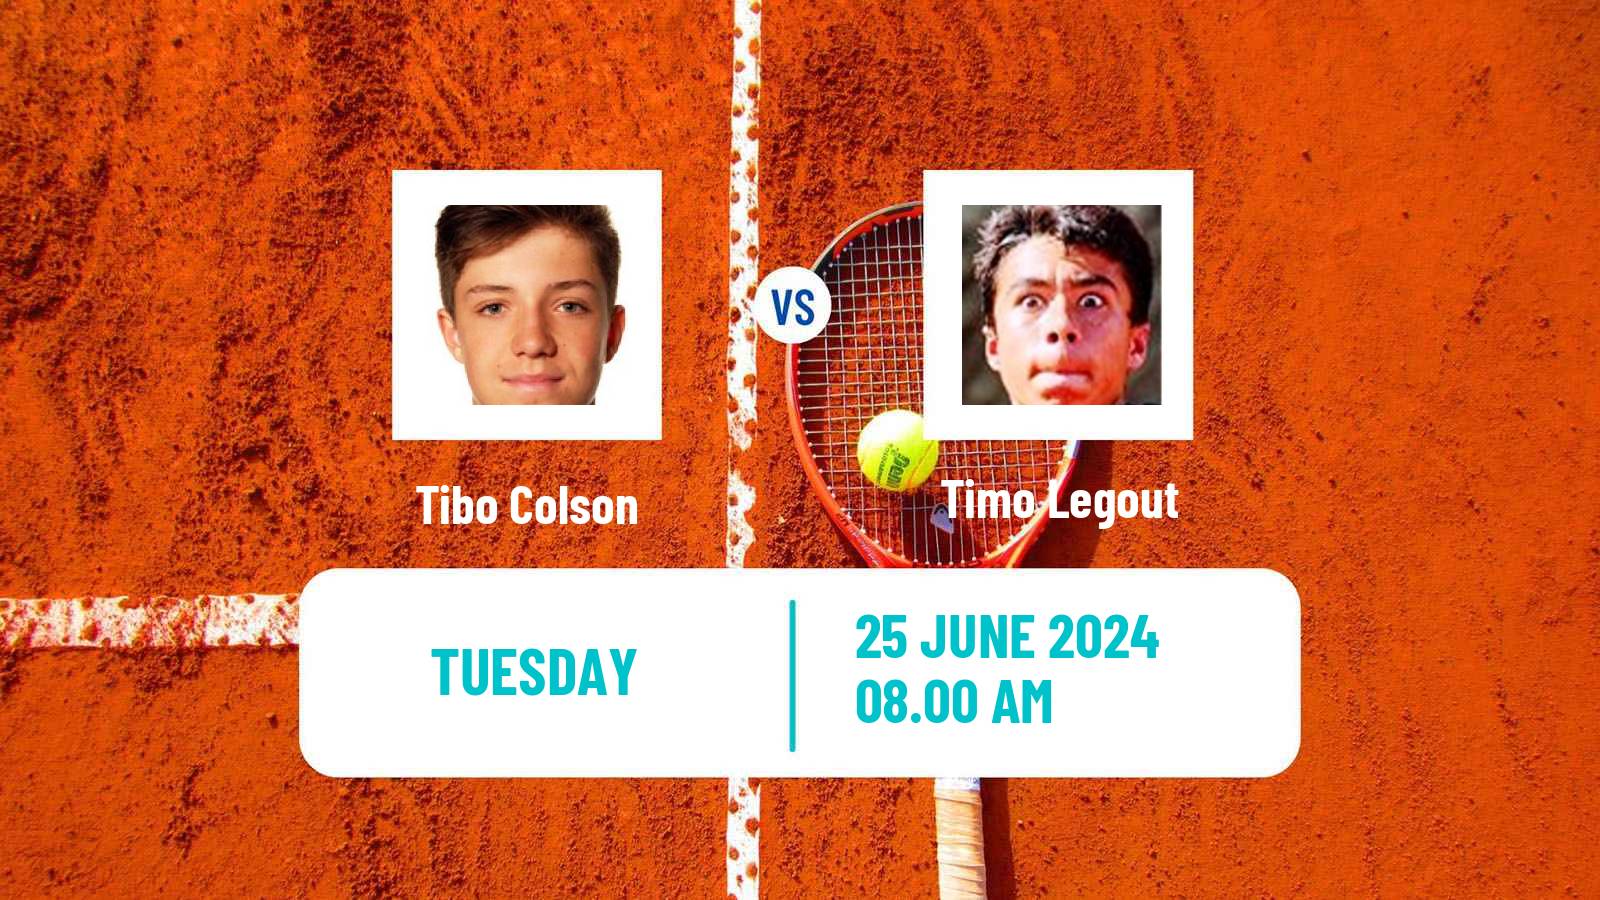 Tennis ITF M25 Brussels Men Tibo Colson - Timo Legout